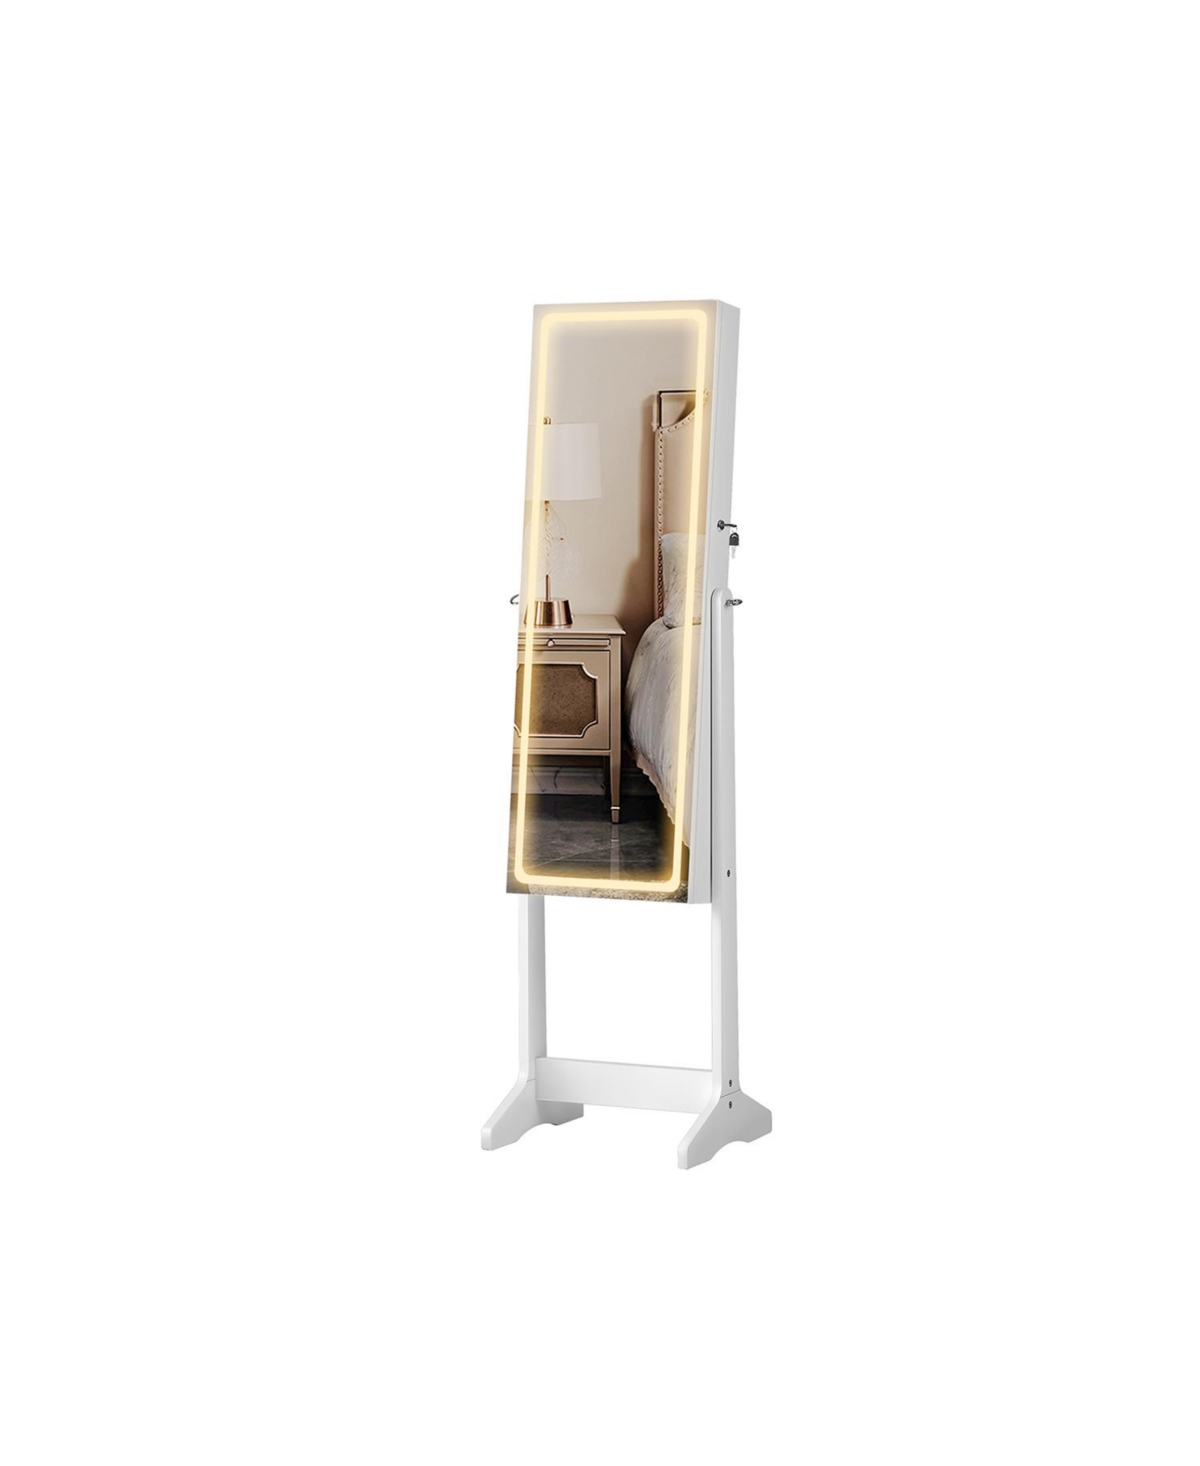 Led Mirror Jewelry Cabinet, Adjustable Brightness and 3 Shades of Light, Standing Jewelry Armoire - White